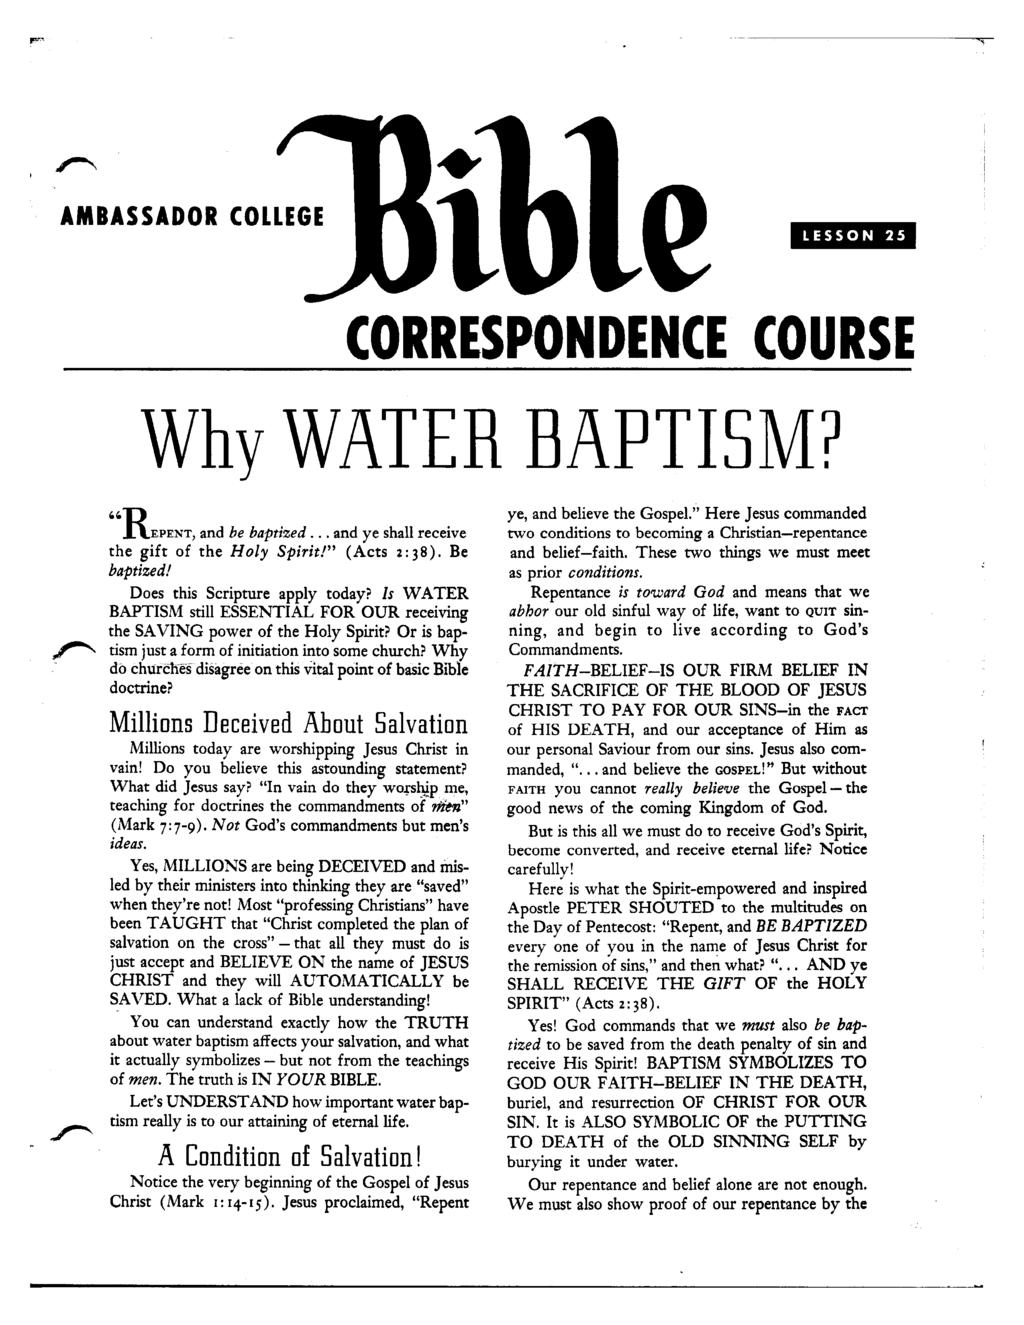 AMBASSADOR COLLEGE CORRESPONDENCE COURSE Why WATER BAPTISM? REPENT, and be baptized... and ye shall receive the gift of the Holy Spirit! (Acts 2: 38). Be baptized! Does this Scripture apply today?